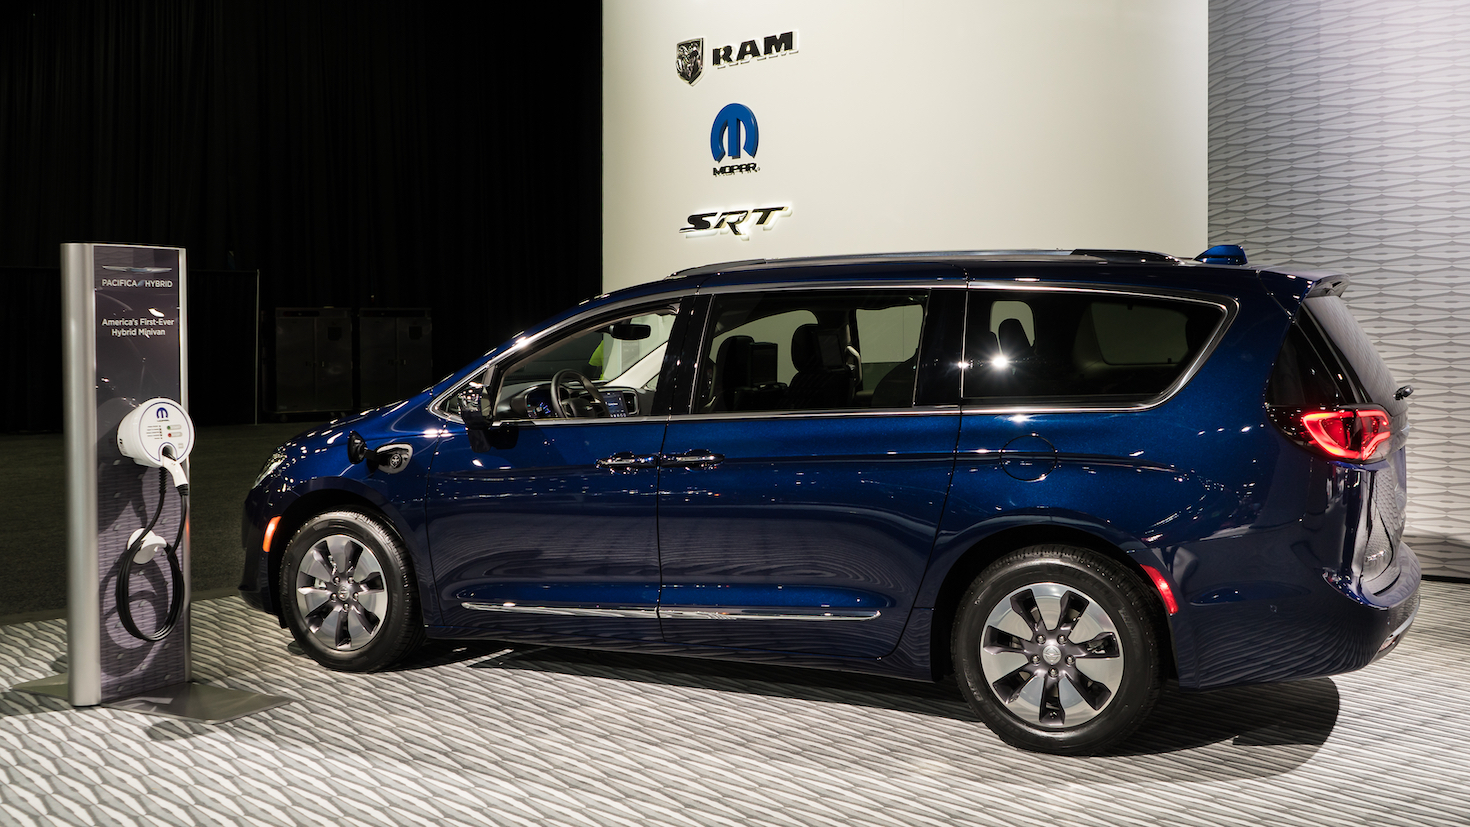 A navy blue Chrysler Pacifica hybrid minivan next to a vehicle charger